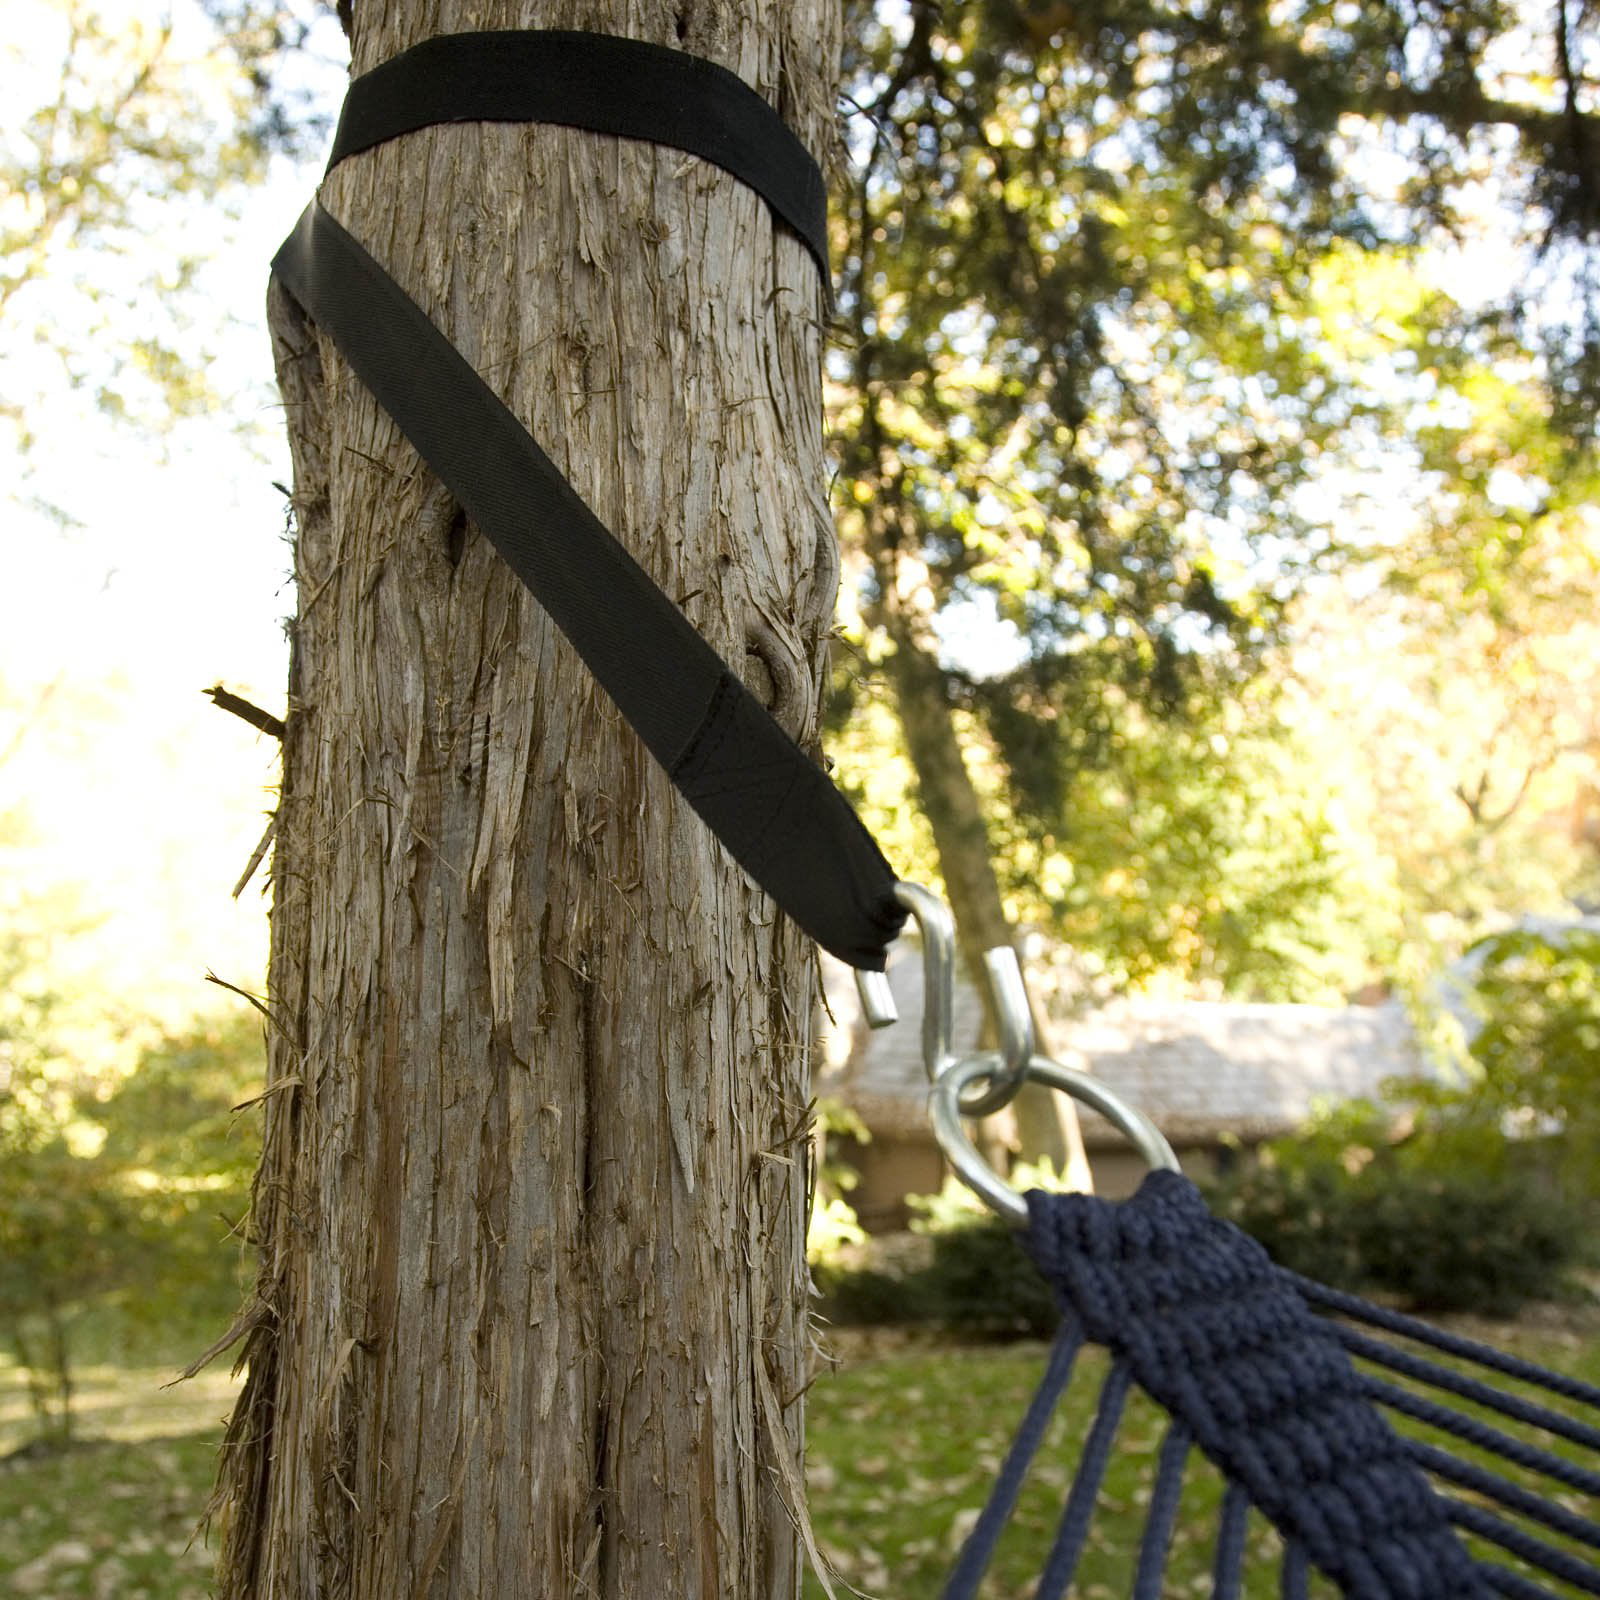 Details about   Camping Hammocks Slings Outdoor Tree Straps Cord Portable Hammocks Ropes US Z4H5 